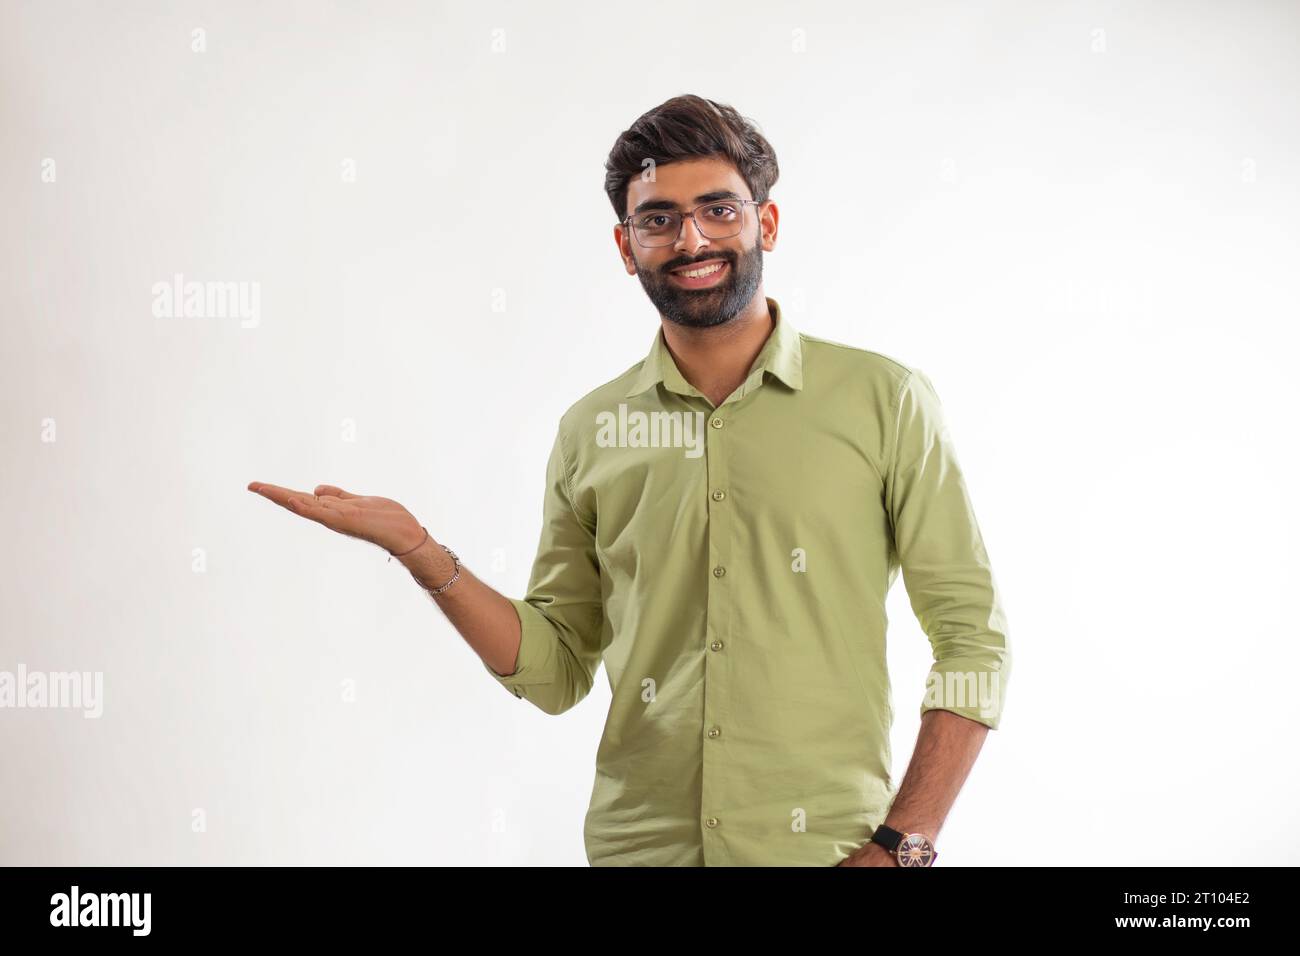 Portrait of a young man gesturing against white background Stock Photo